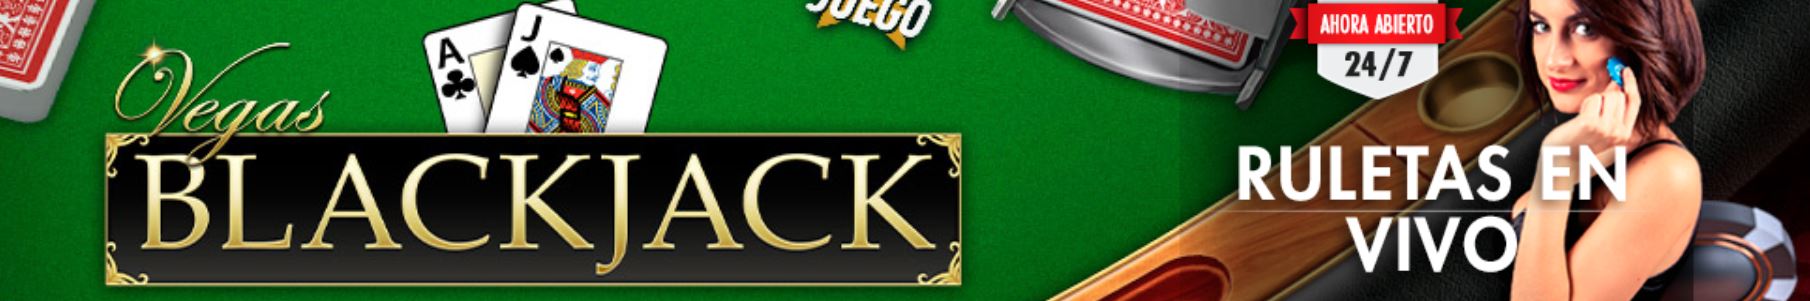 Blackjack is one of the most used games on online gambling sites.